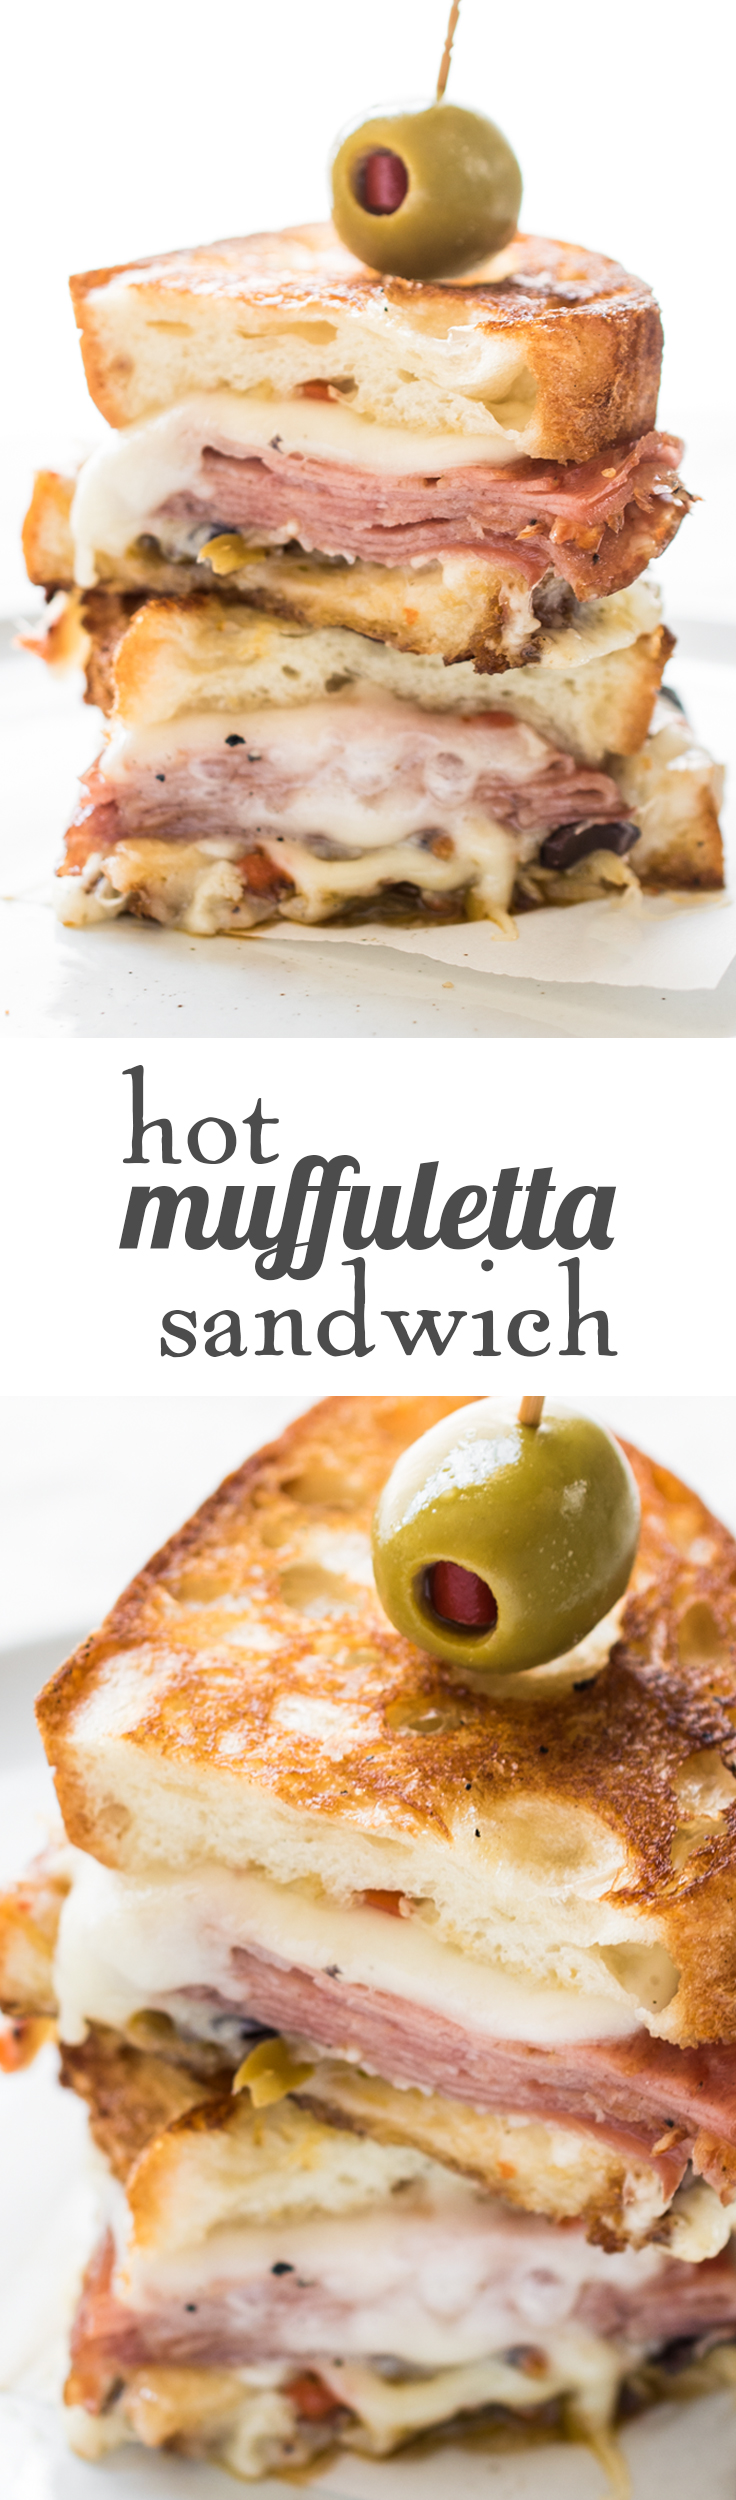 A Hot Muffaletta Sandwich dripping with cheese and packed with punch!